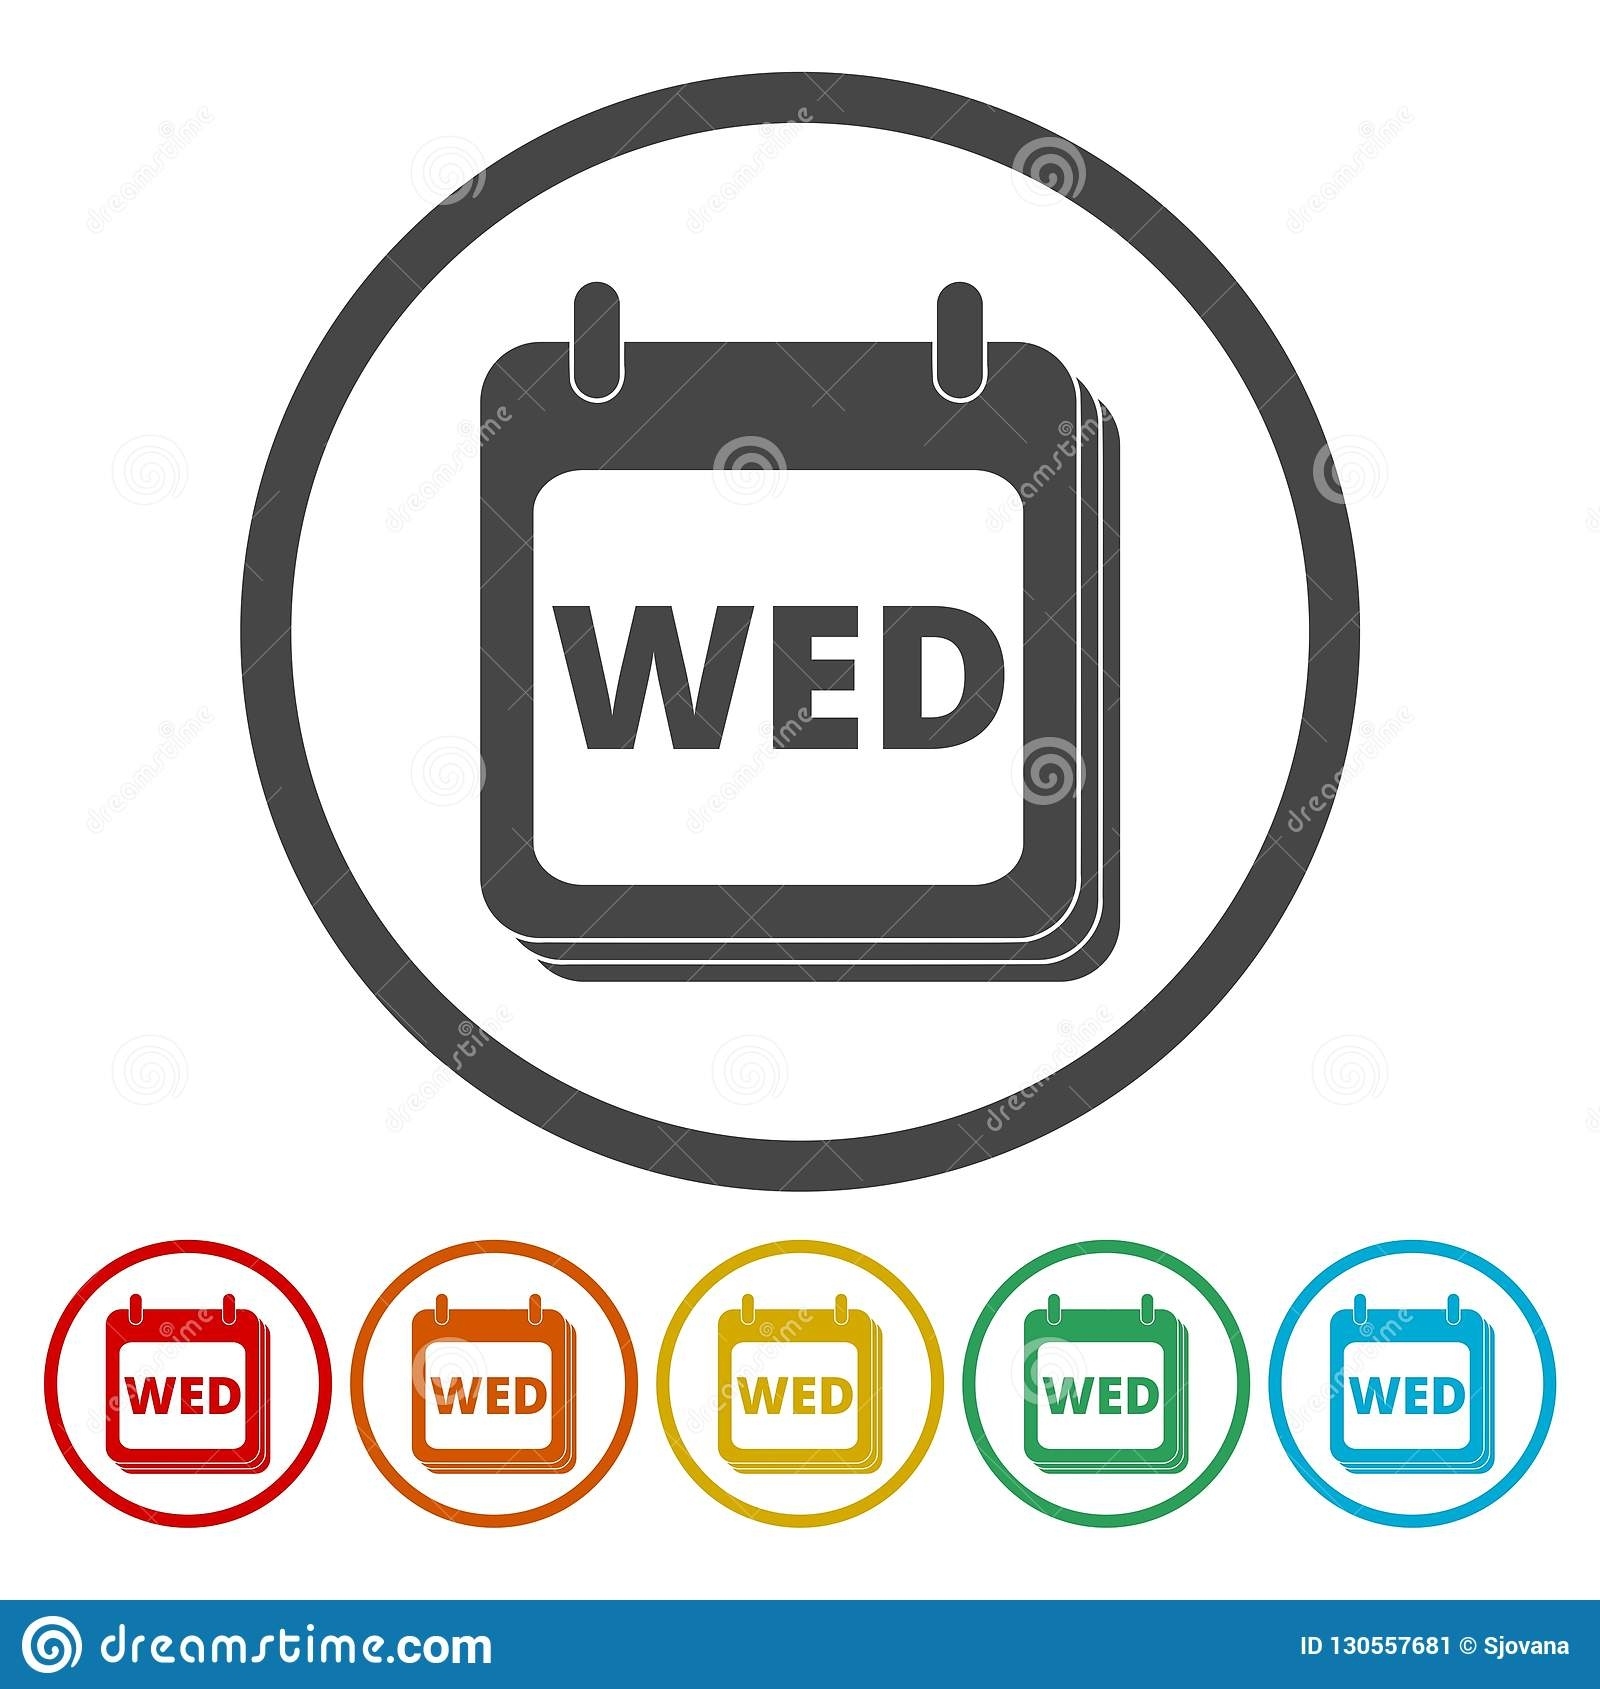 A Wall Calendar With The Word Wednesday. Flat Colorful Buttons For Calendar Icon For Word